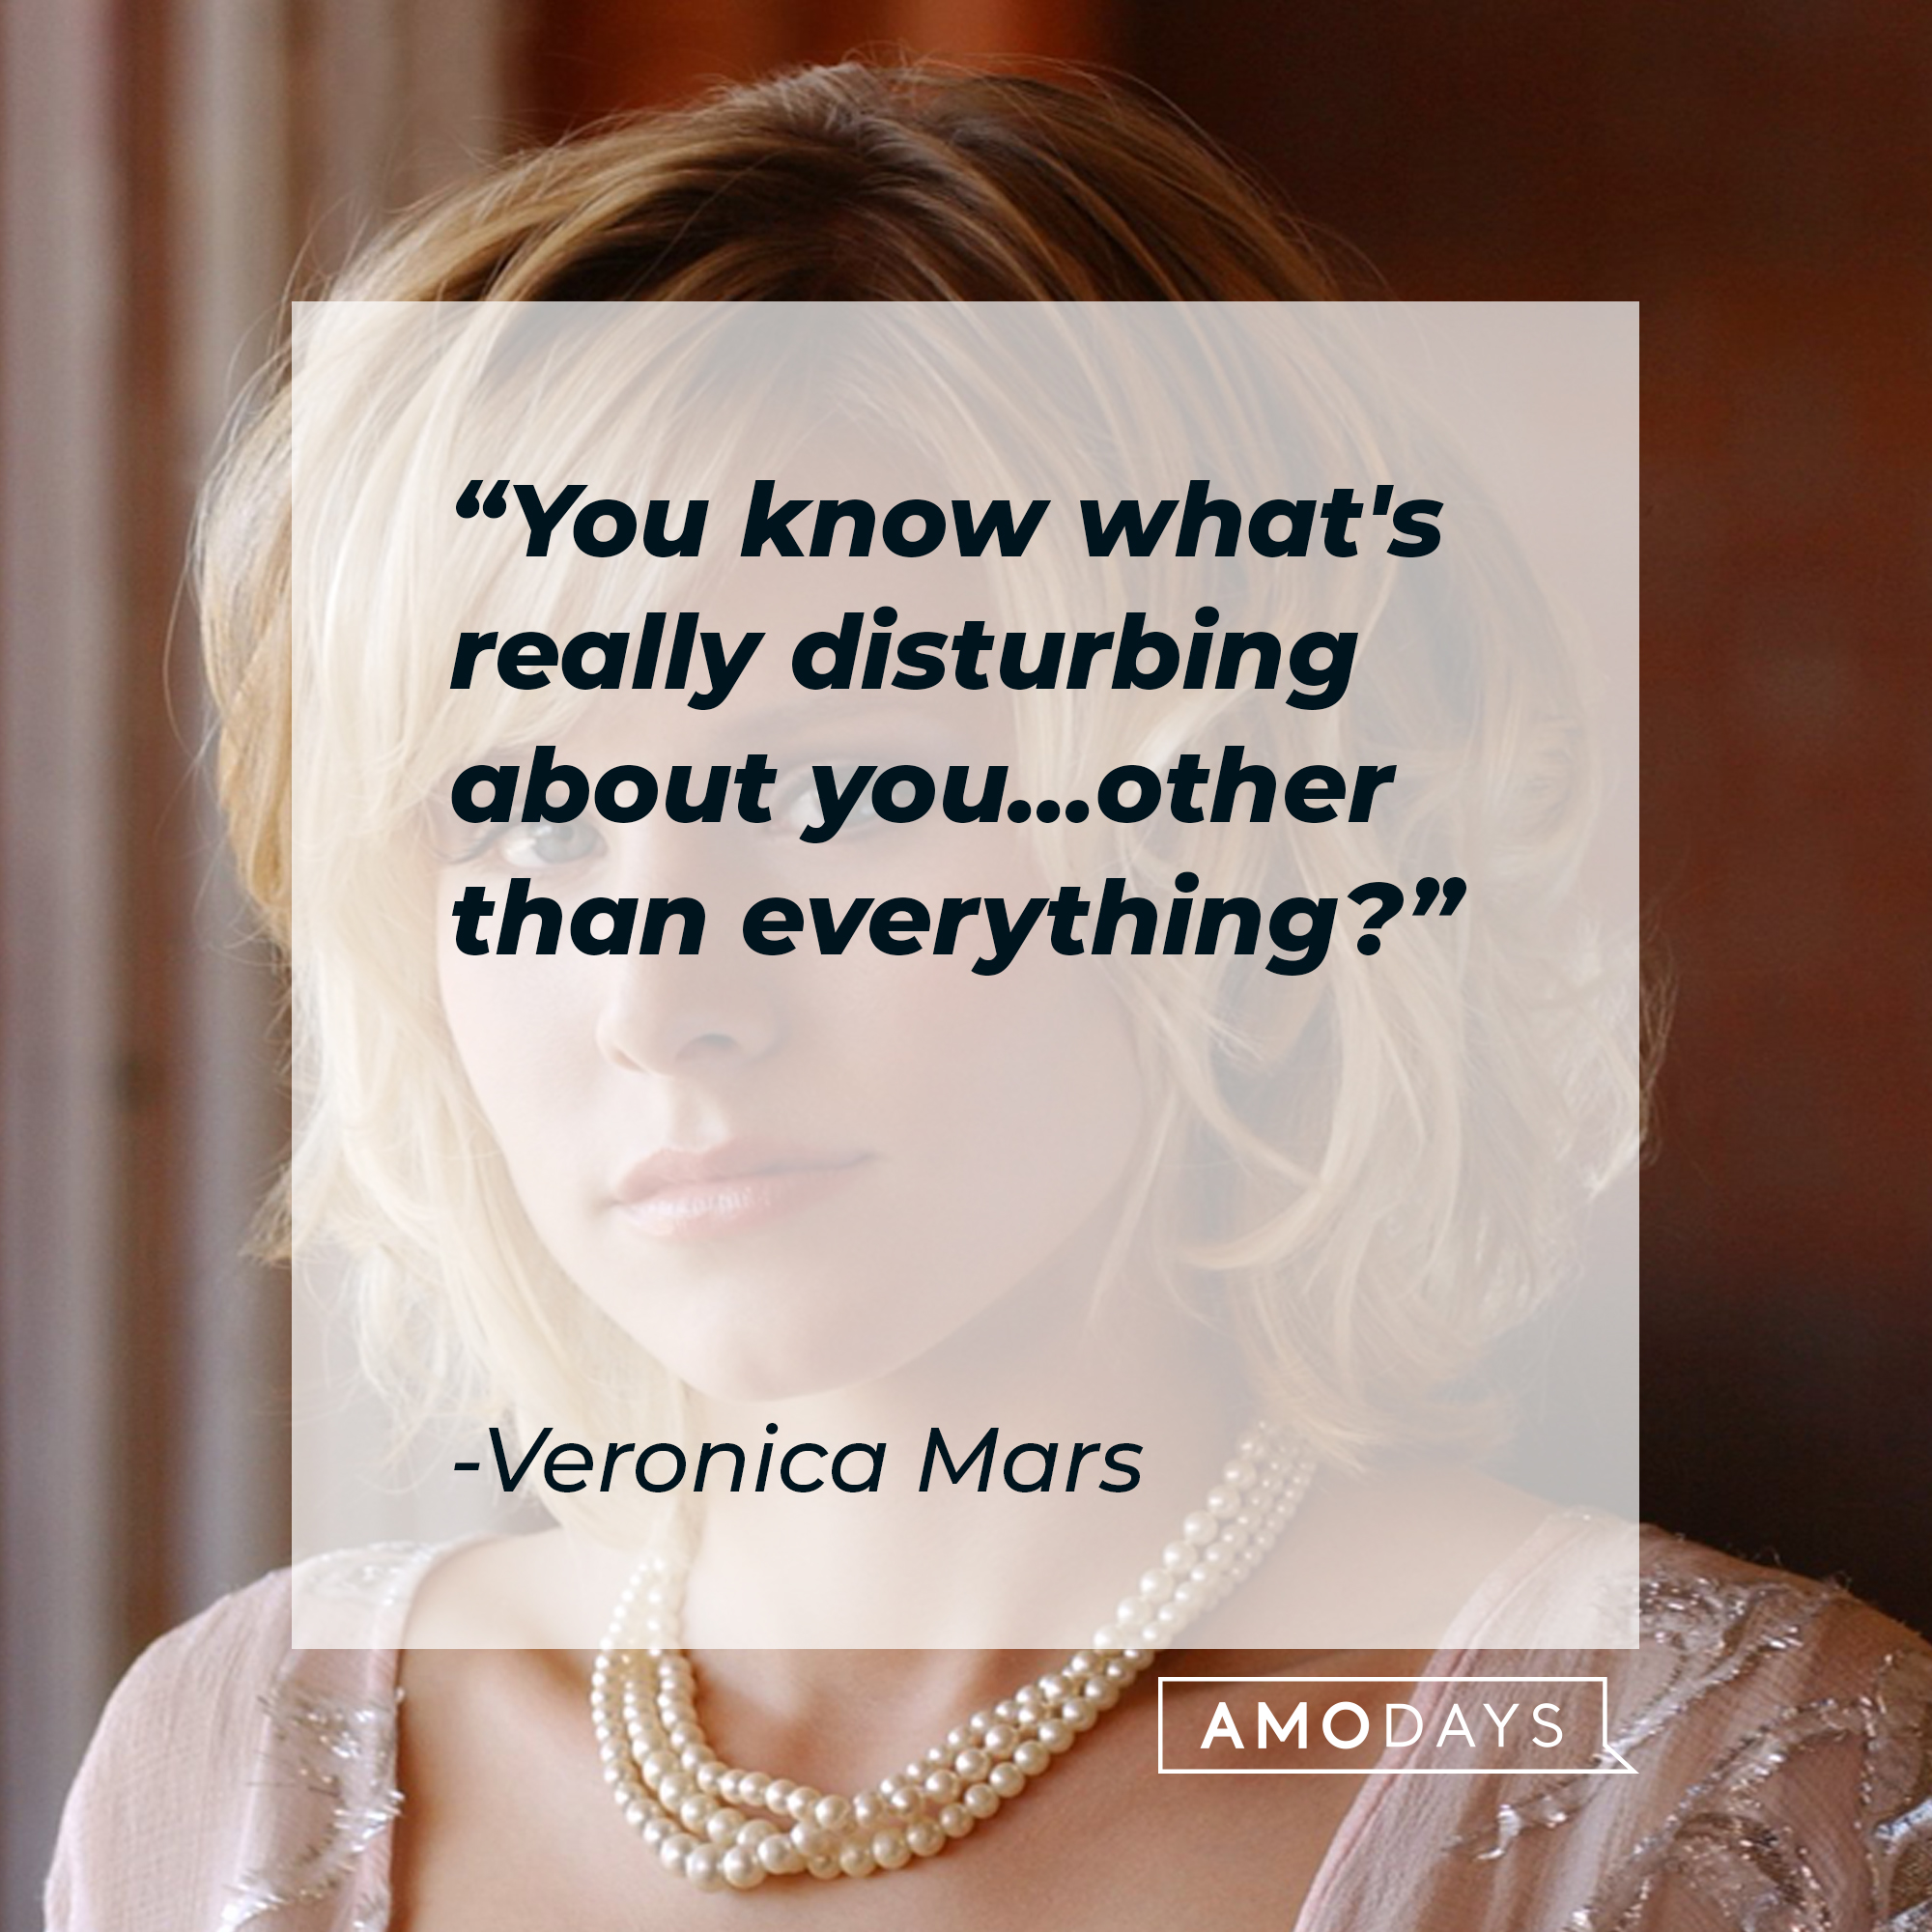 Veronica Mars' quote: "You know what's really disturbing about you...other than everything?" | Source: facebook.com/VeronicaMars